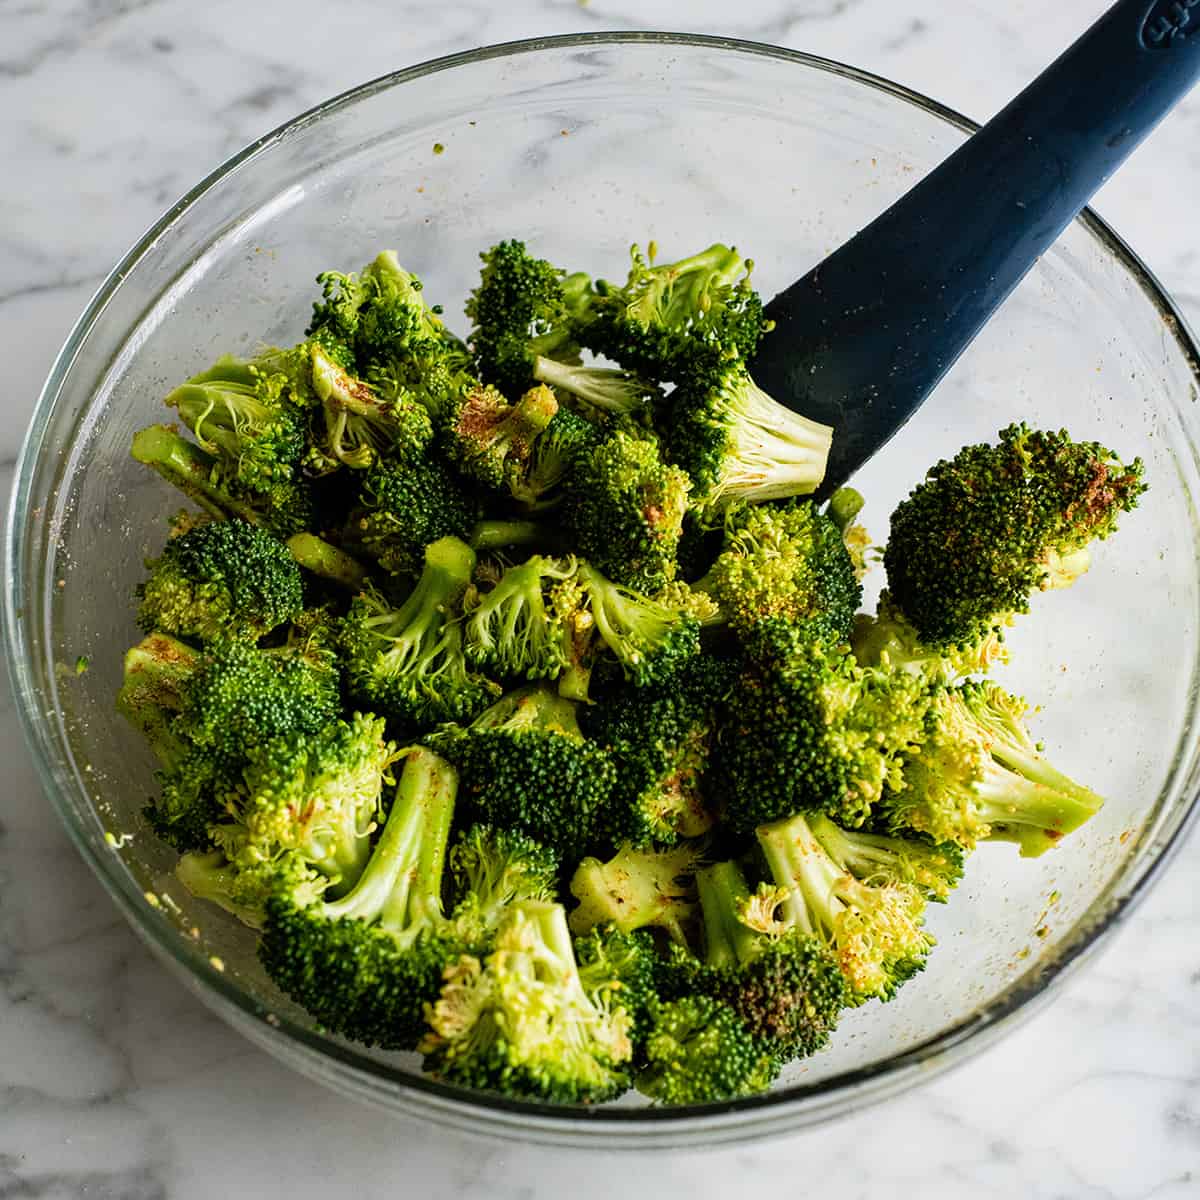 photo showing how to roast broccoli - stirring broccoli in a bowl